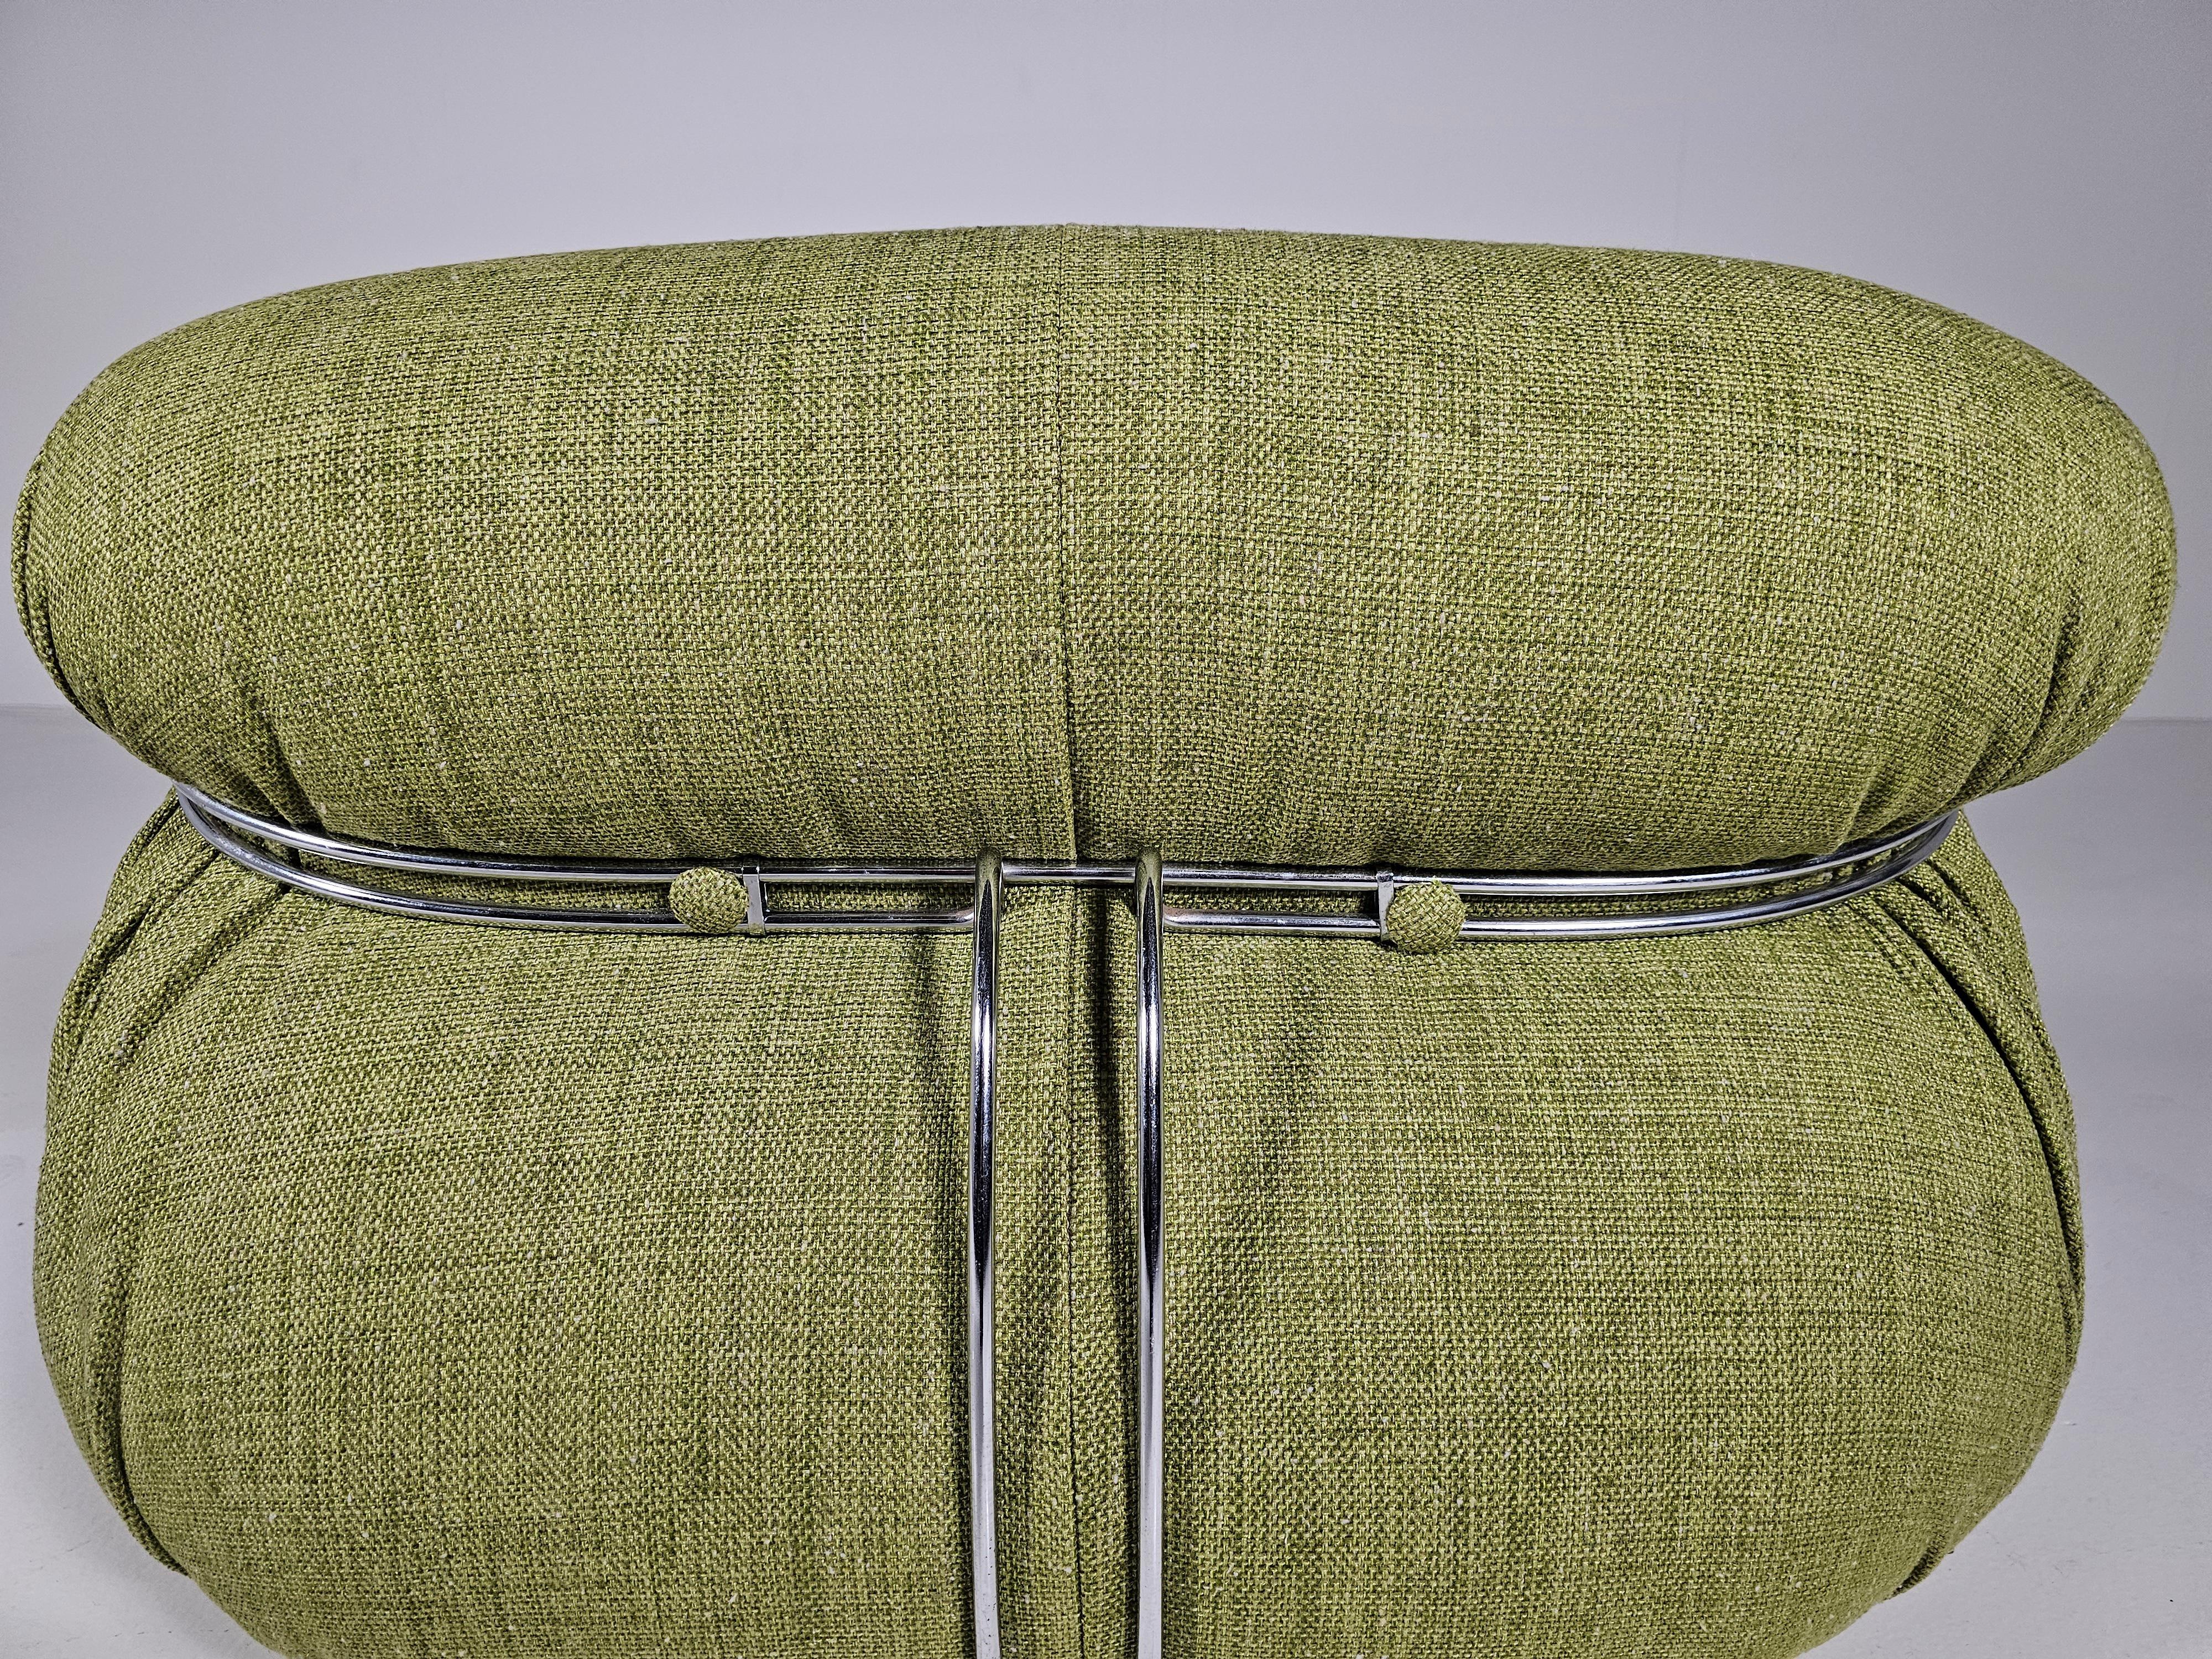 Late 20th Century Soriana Lounge Chair in green linen fabric, Afra & Tobia Scarpa, Cassina, 1970s For Sale